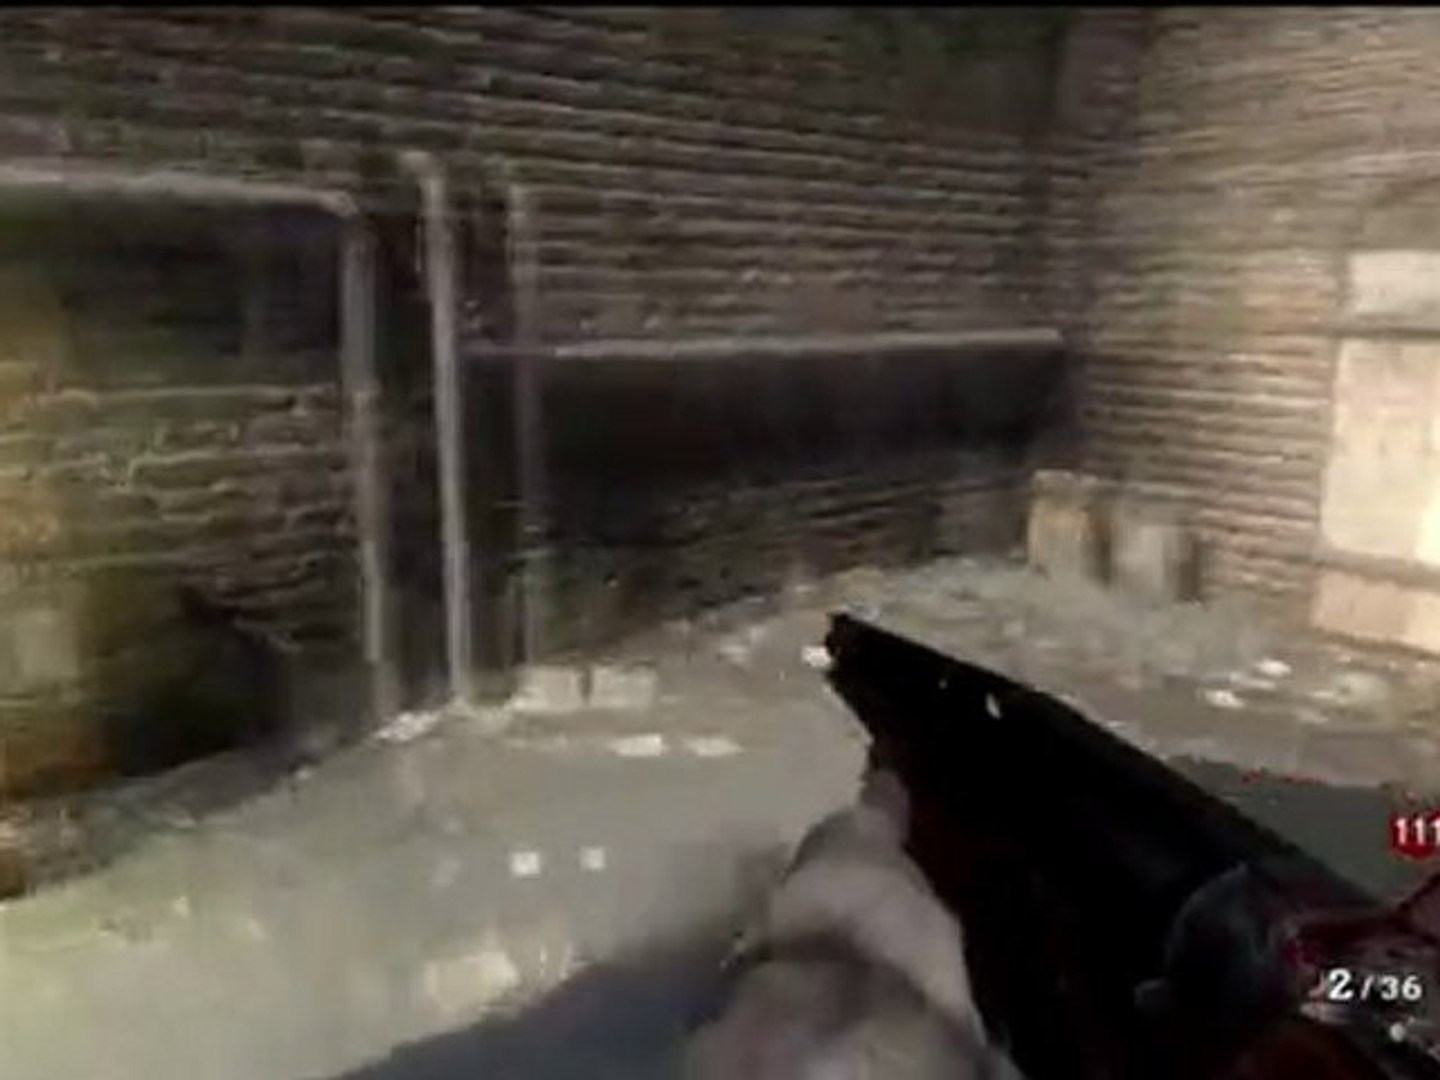 Call Of Duty Black Ops Kino Der Toten Easter Egg Video Dailymotion